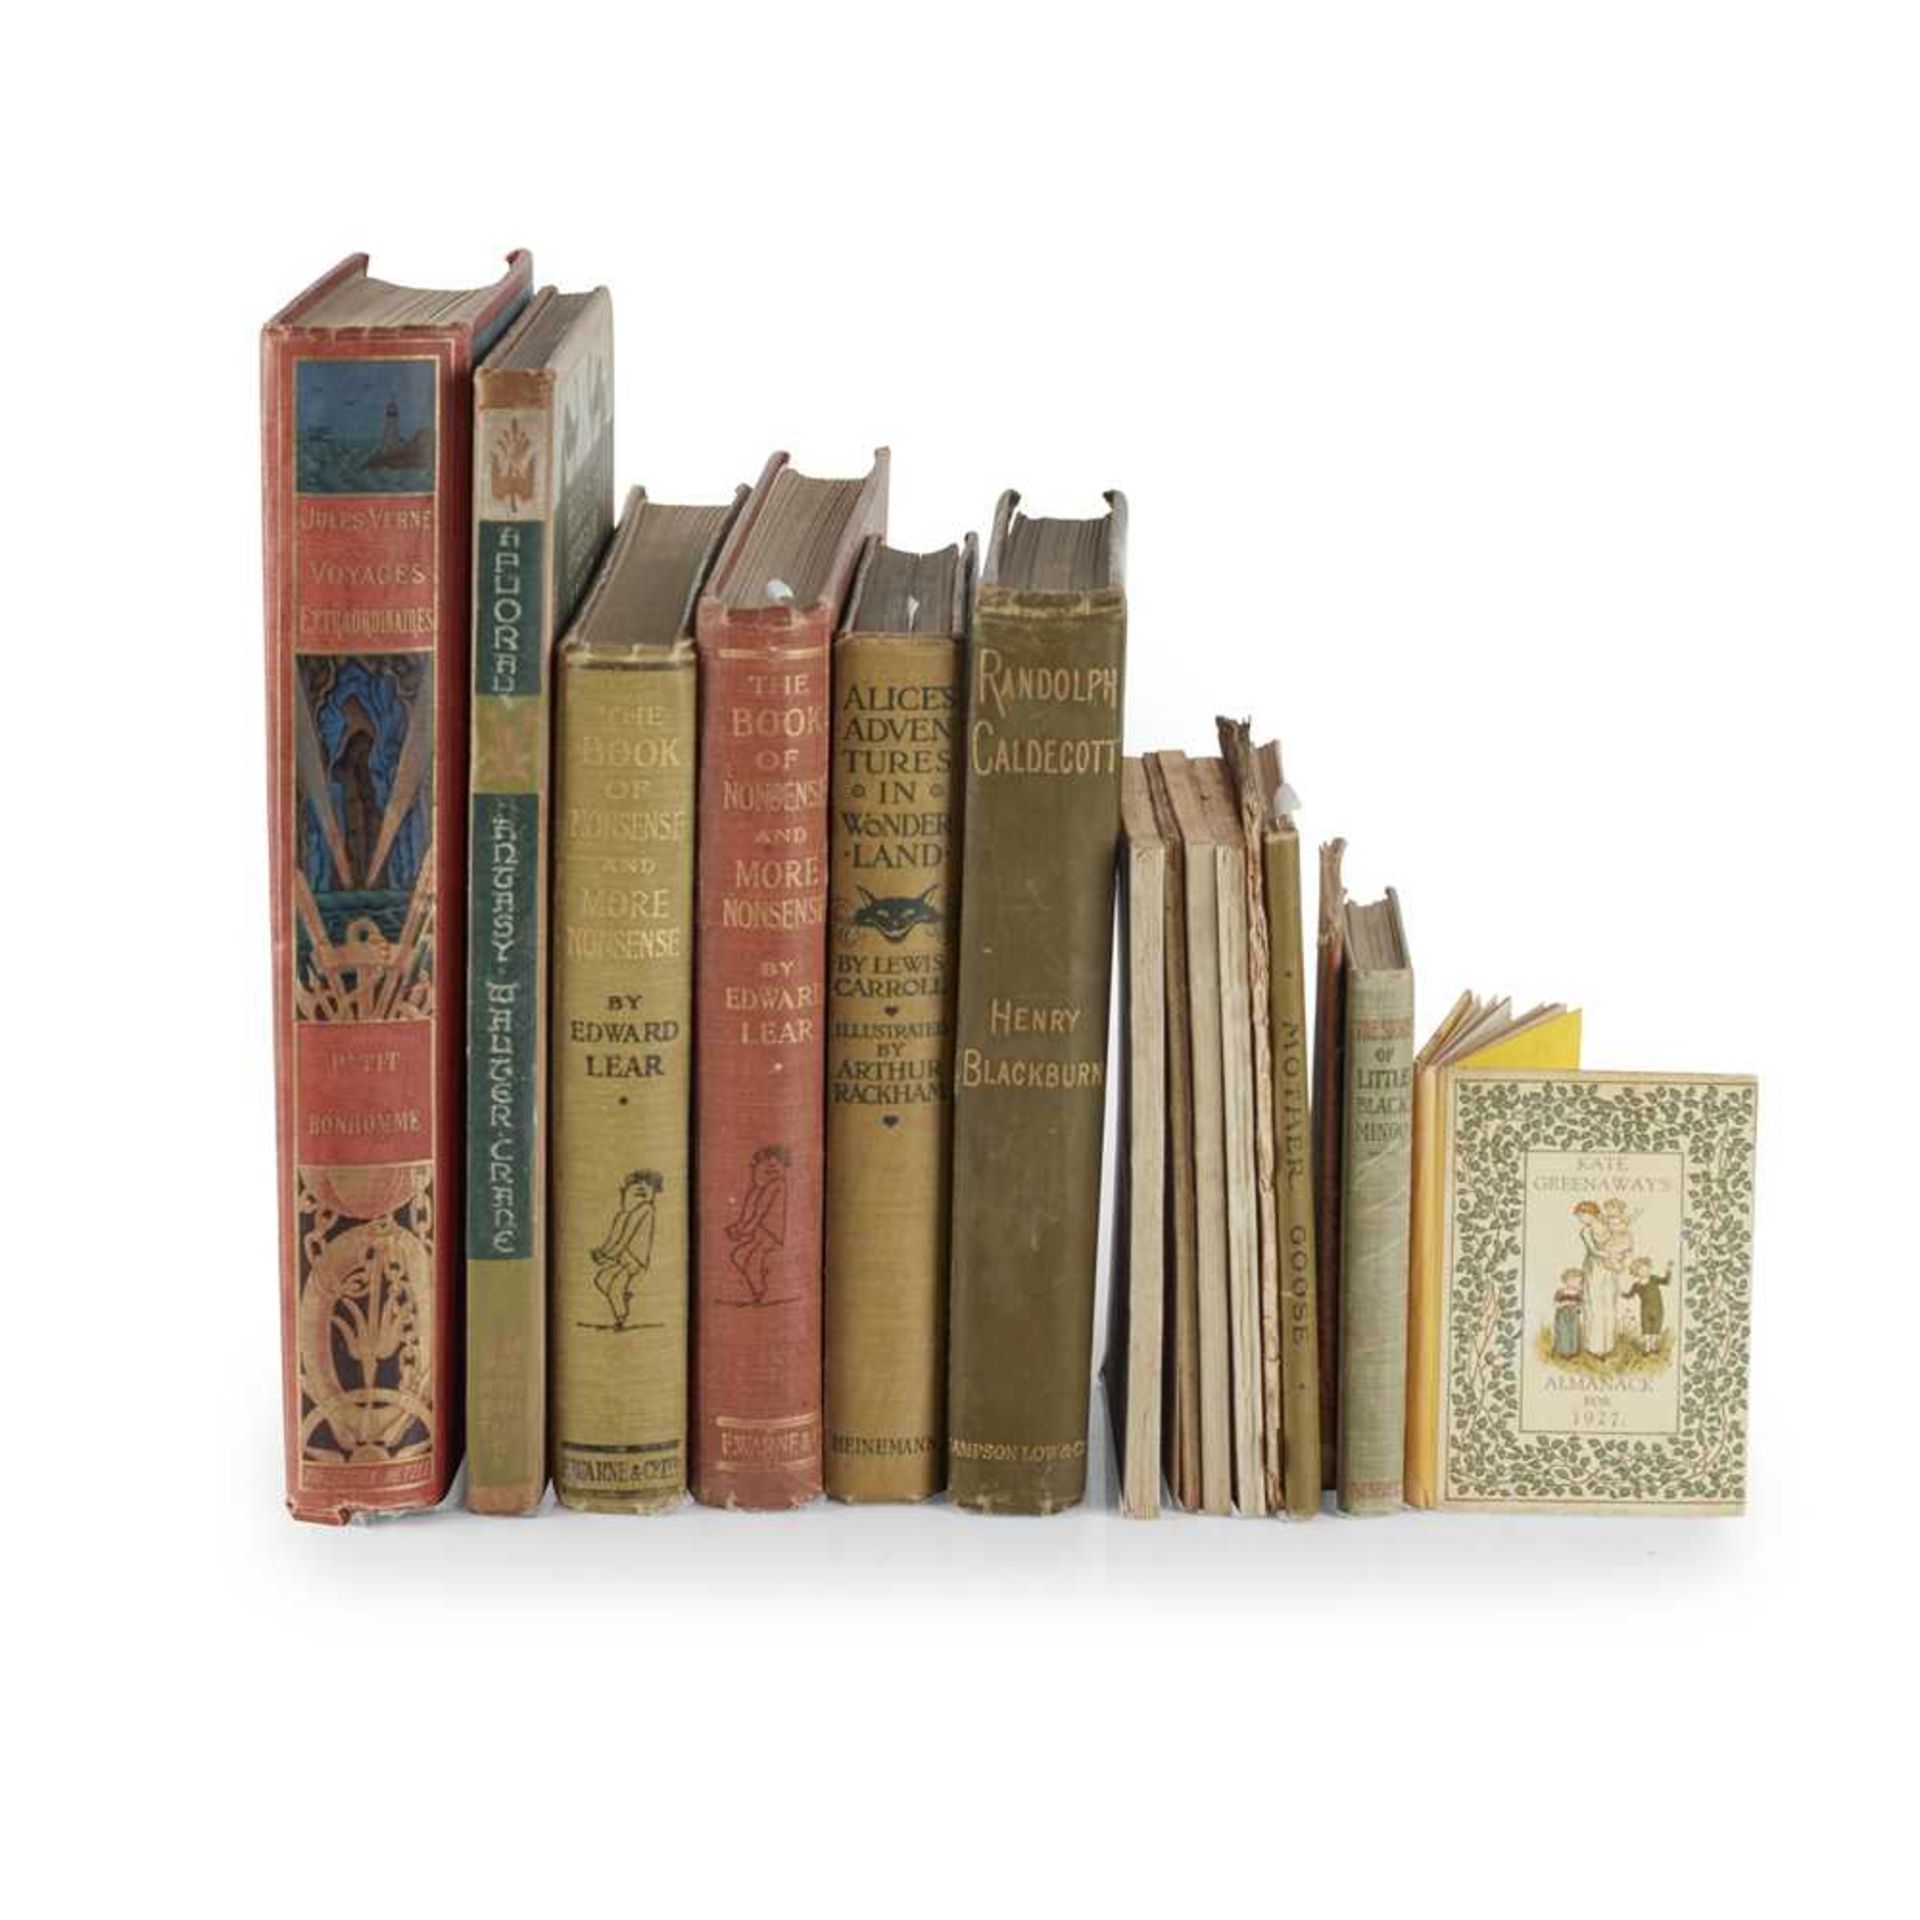 19th Century Children's Books including Lear, Edward. The Book of Nonsense and More Nonsense.